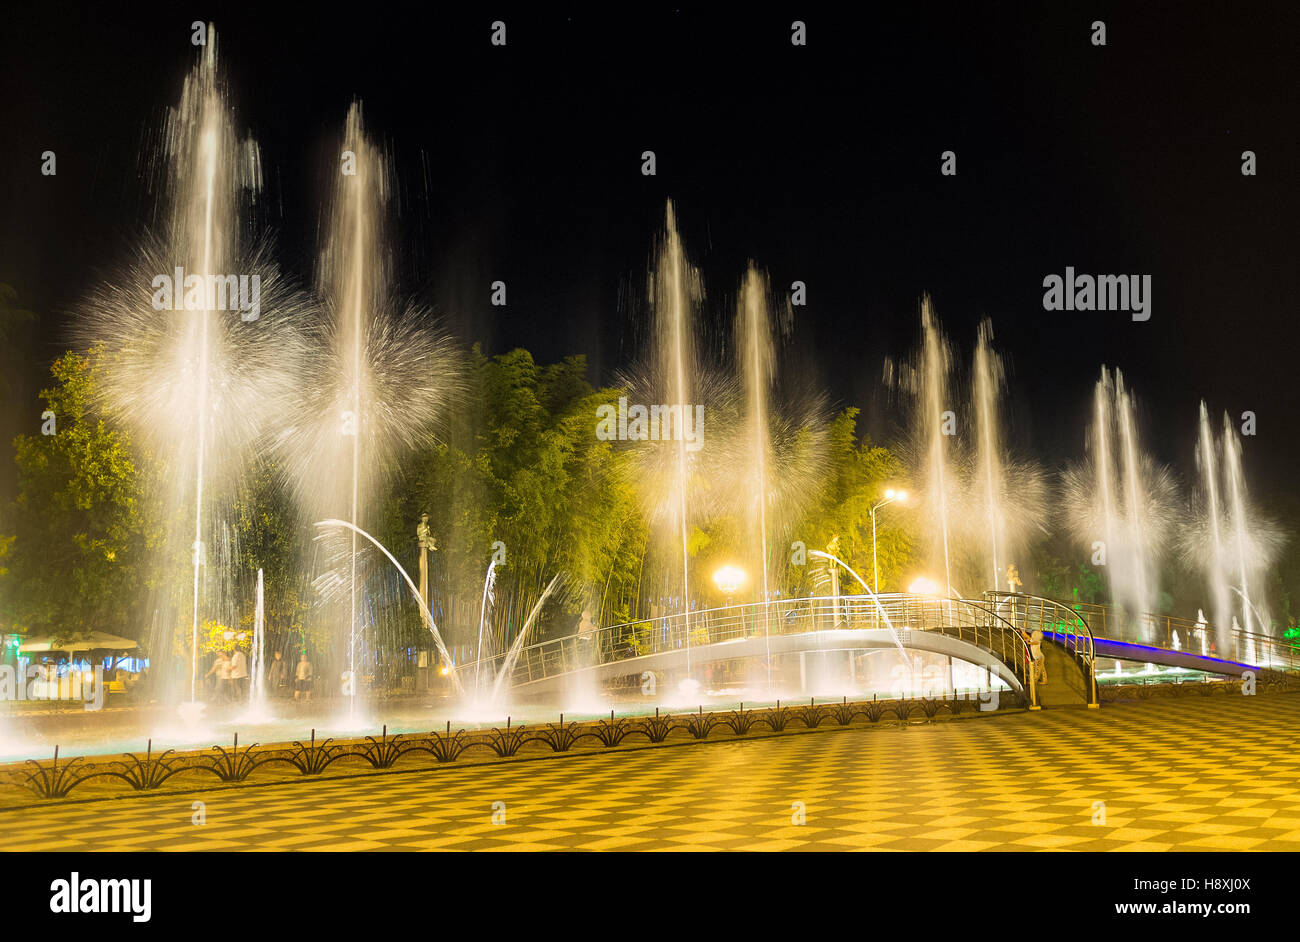 The show of singing and dancing fountains is popular among all ages tourists, visiting Batumi, Georgia. Stock Photo